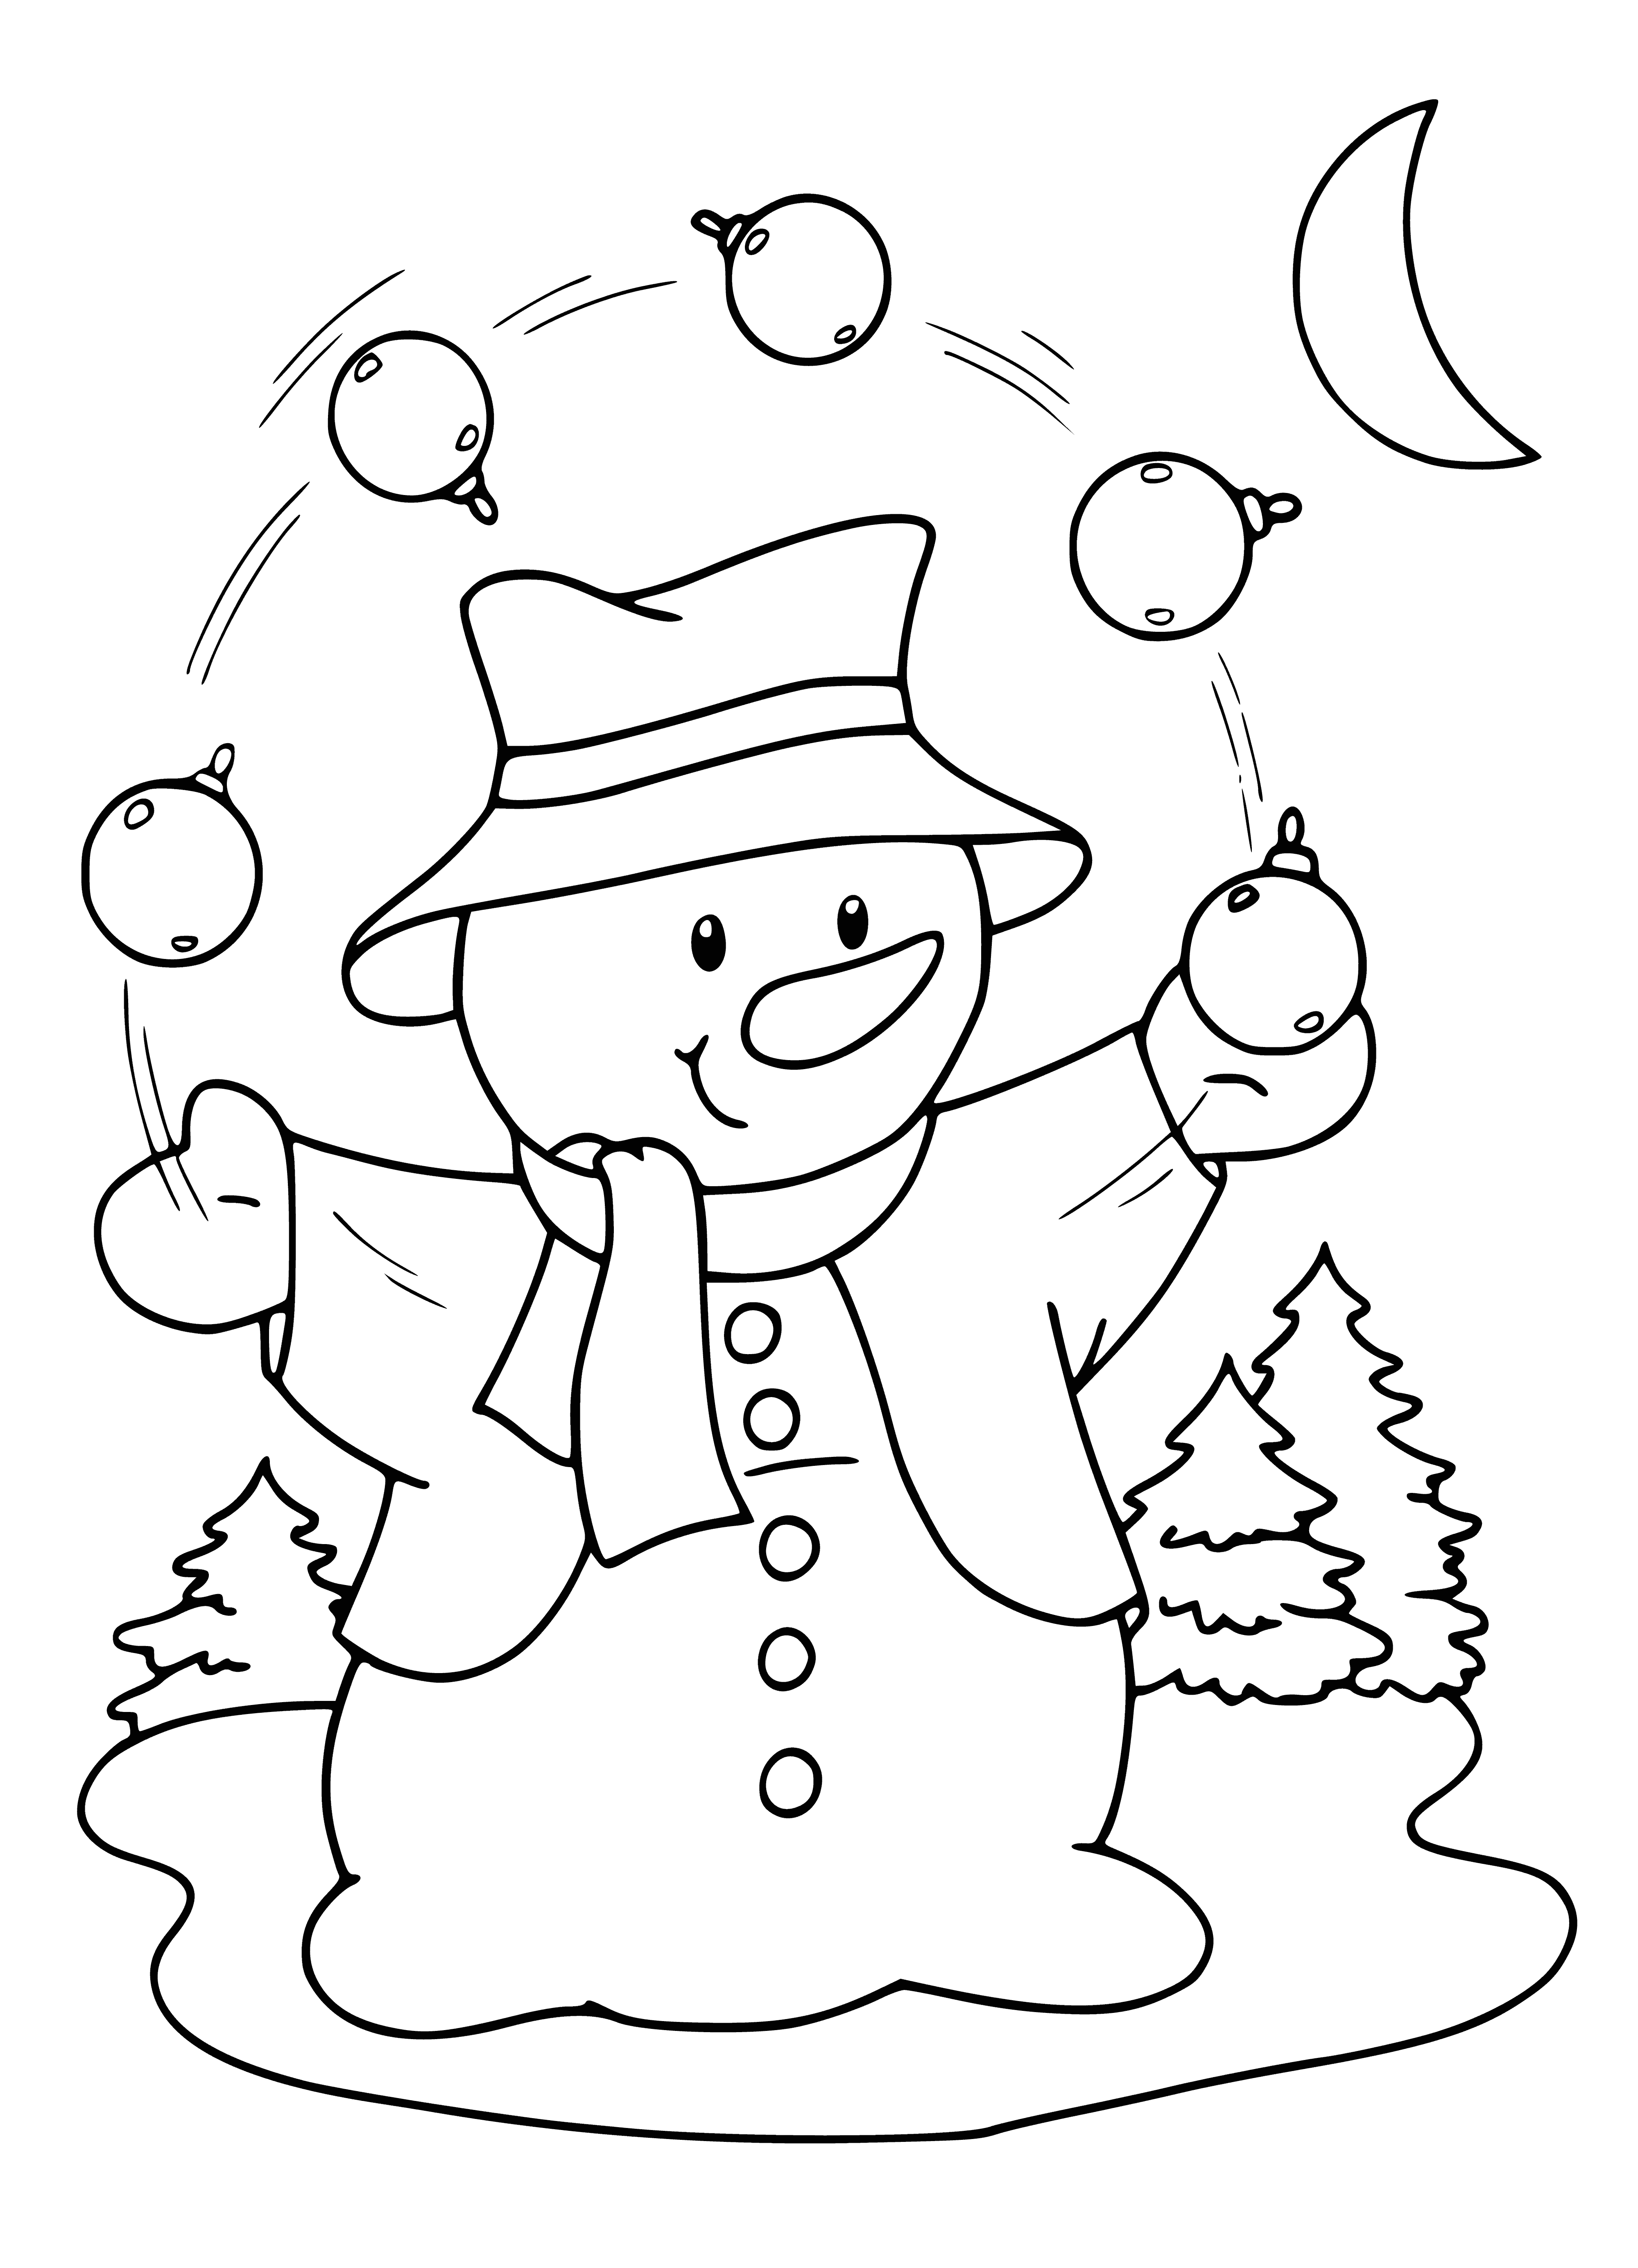 Snowman juggles red/green ball+gold star; dons red scarf+green hat; stands on snow pile.